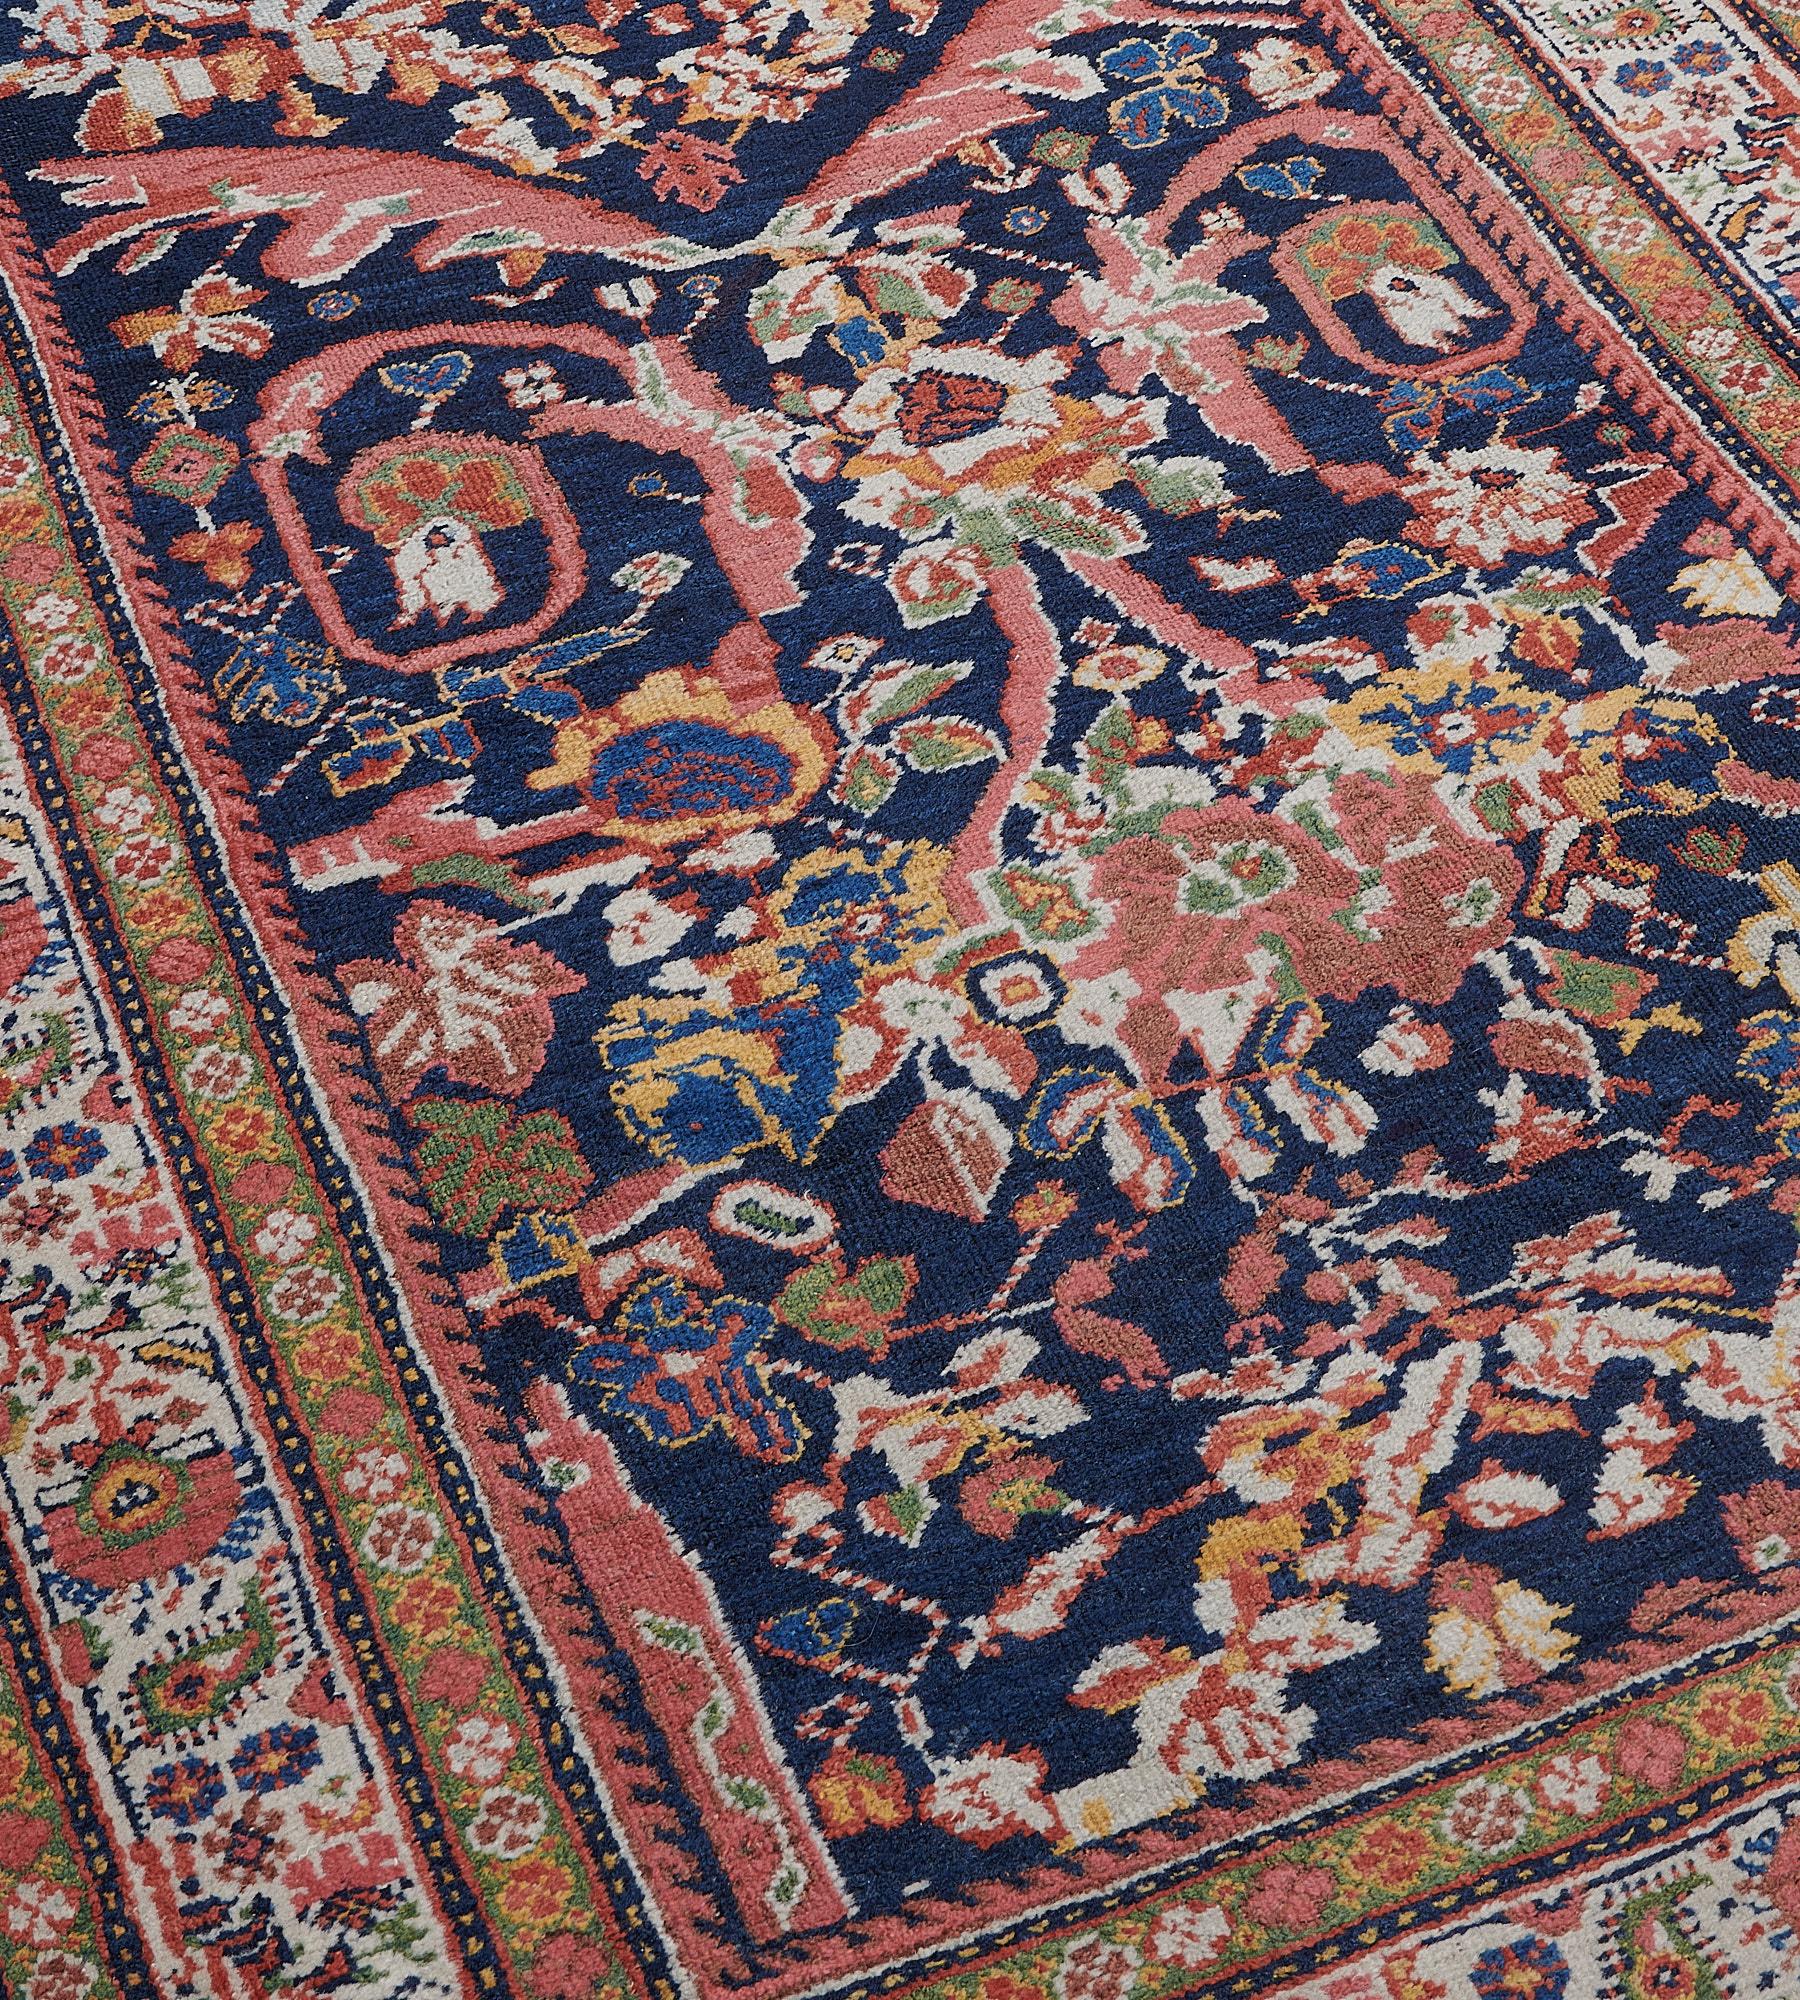 This antique handwoven Sultanabad runner has a deep indigo-blue field with an overall design of brick-red angular acanthus leaves supporting a large brick-red flower head surrounded by a light blue garland further stylized floral vine and smaller